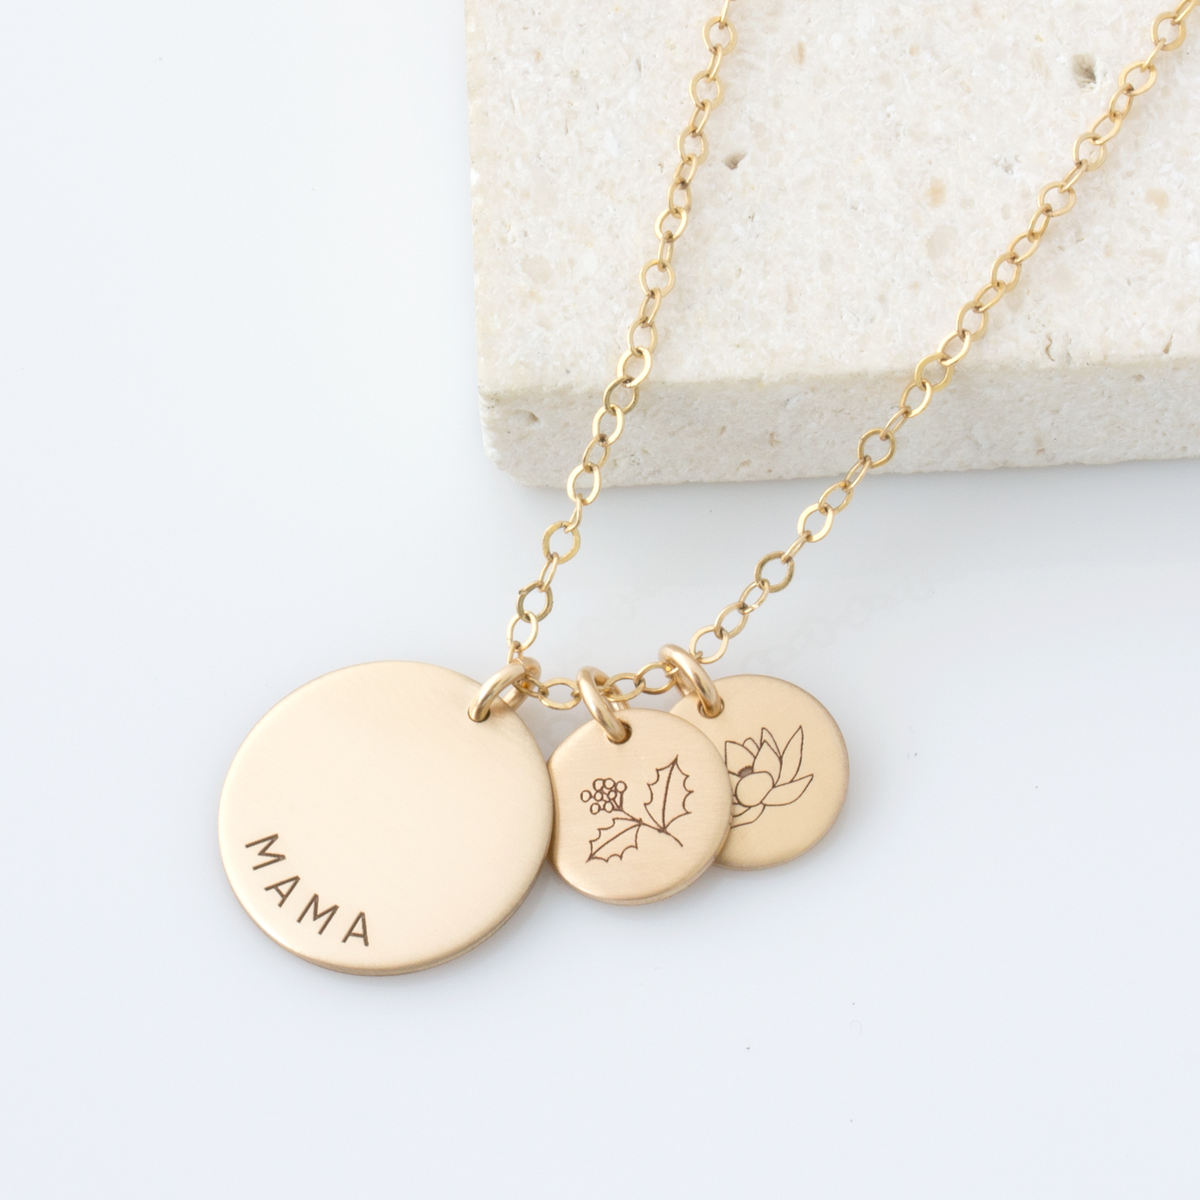 Engravable 1 inch 14k White Gold Monogram Disc Charm Necklace with Sin -  Sandy Steven Engravers